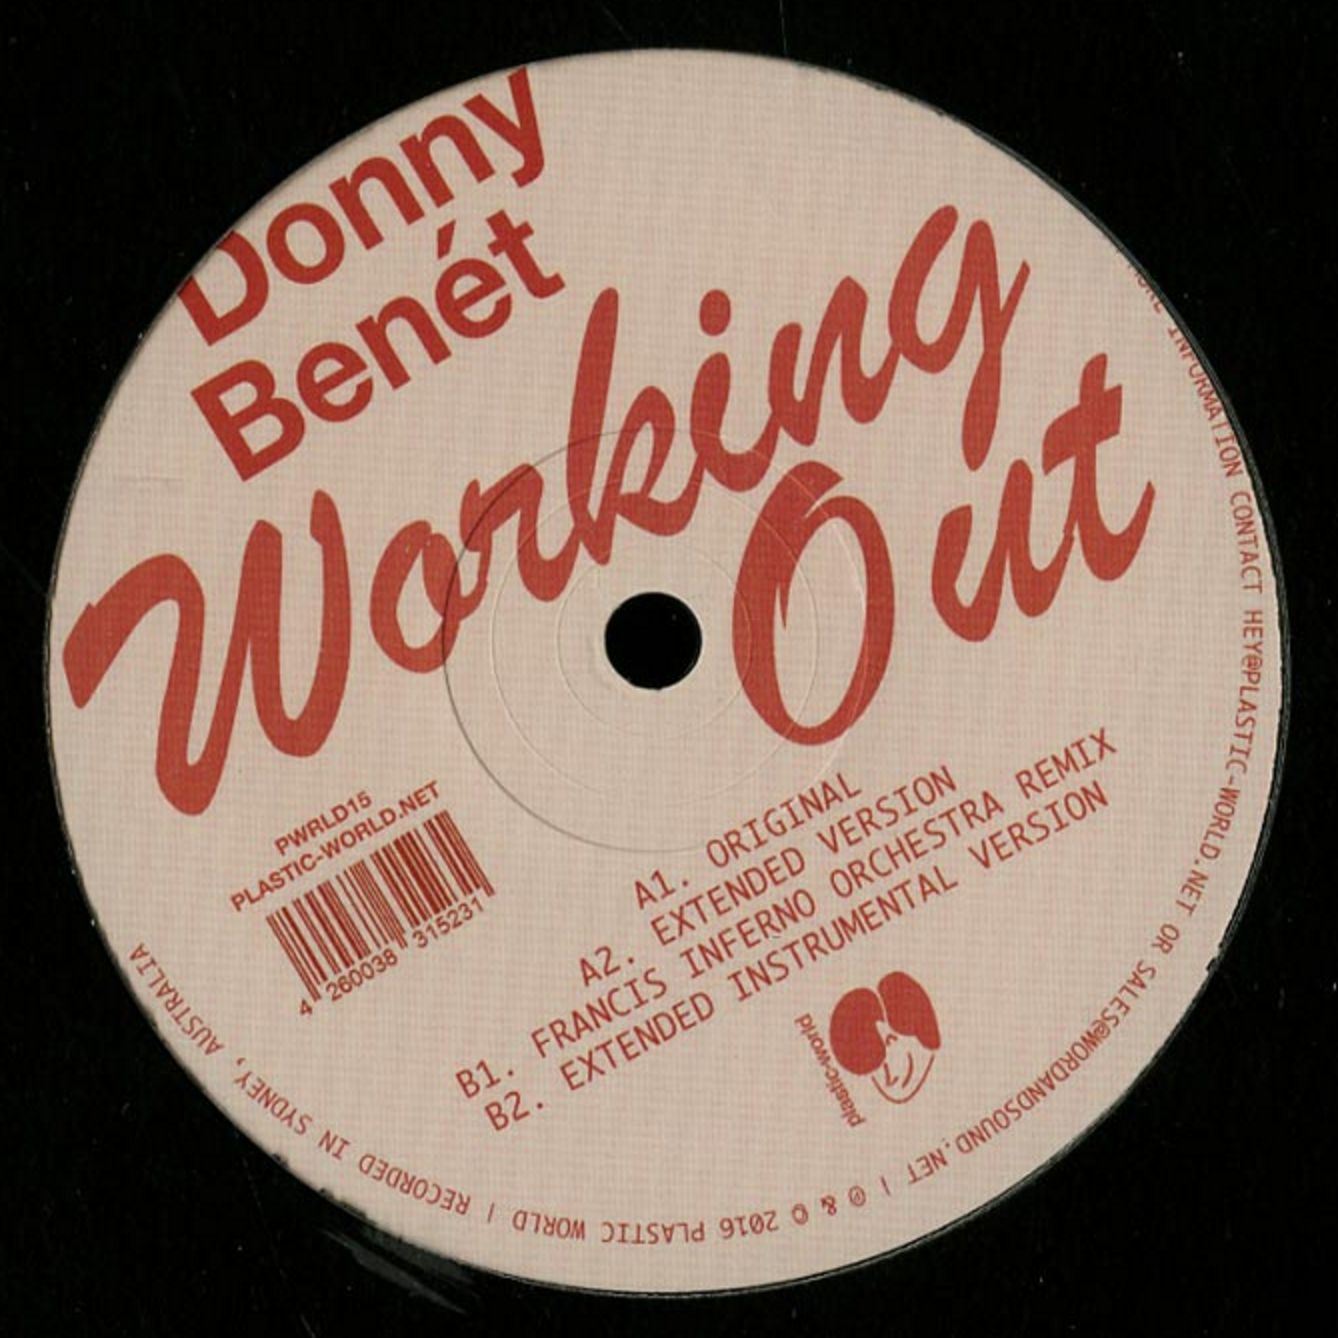 Download Donny Benet - Working Out (FIO's Yarra Bend Reprise)